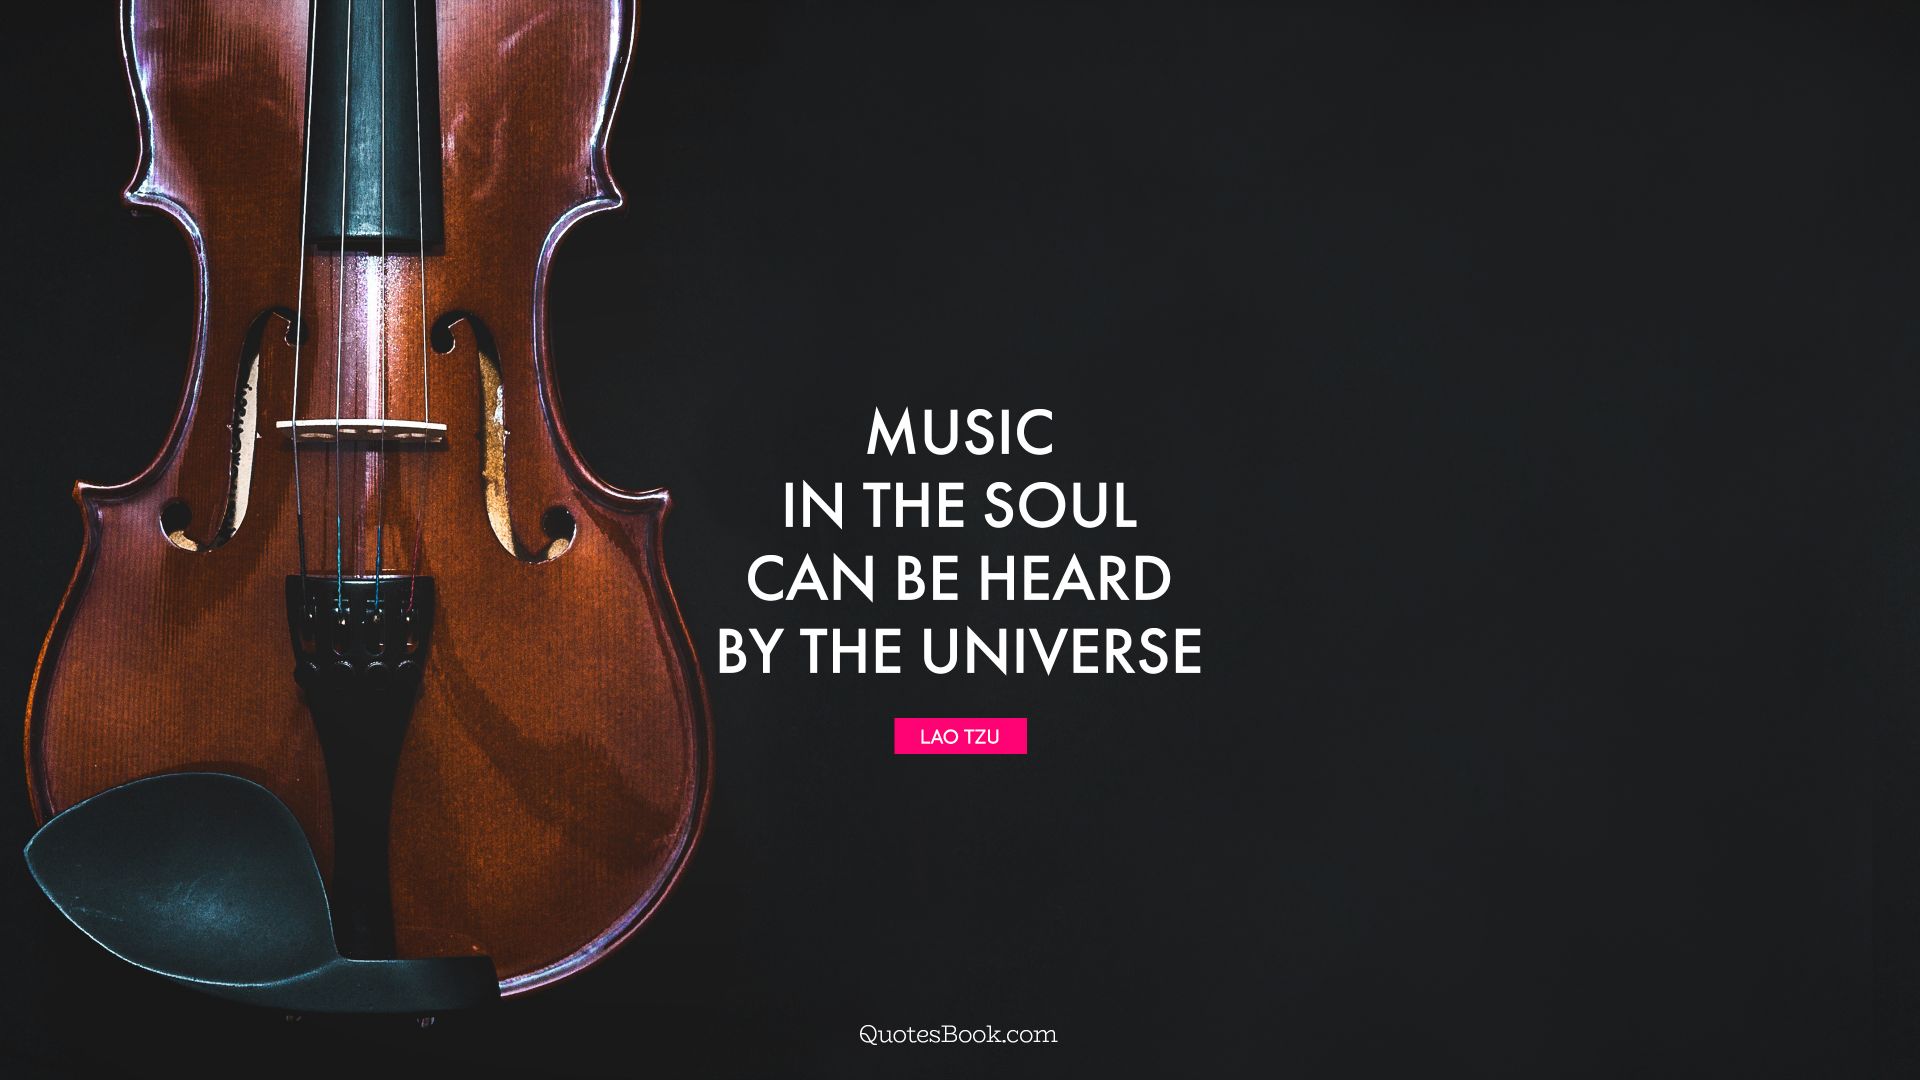 Music in the soul can be heard by the universe. - Quote by Lao Tzu